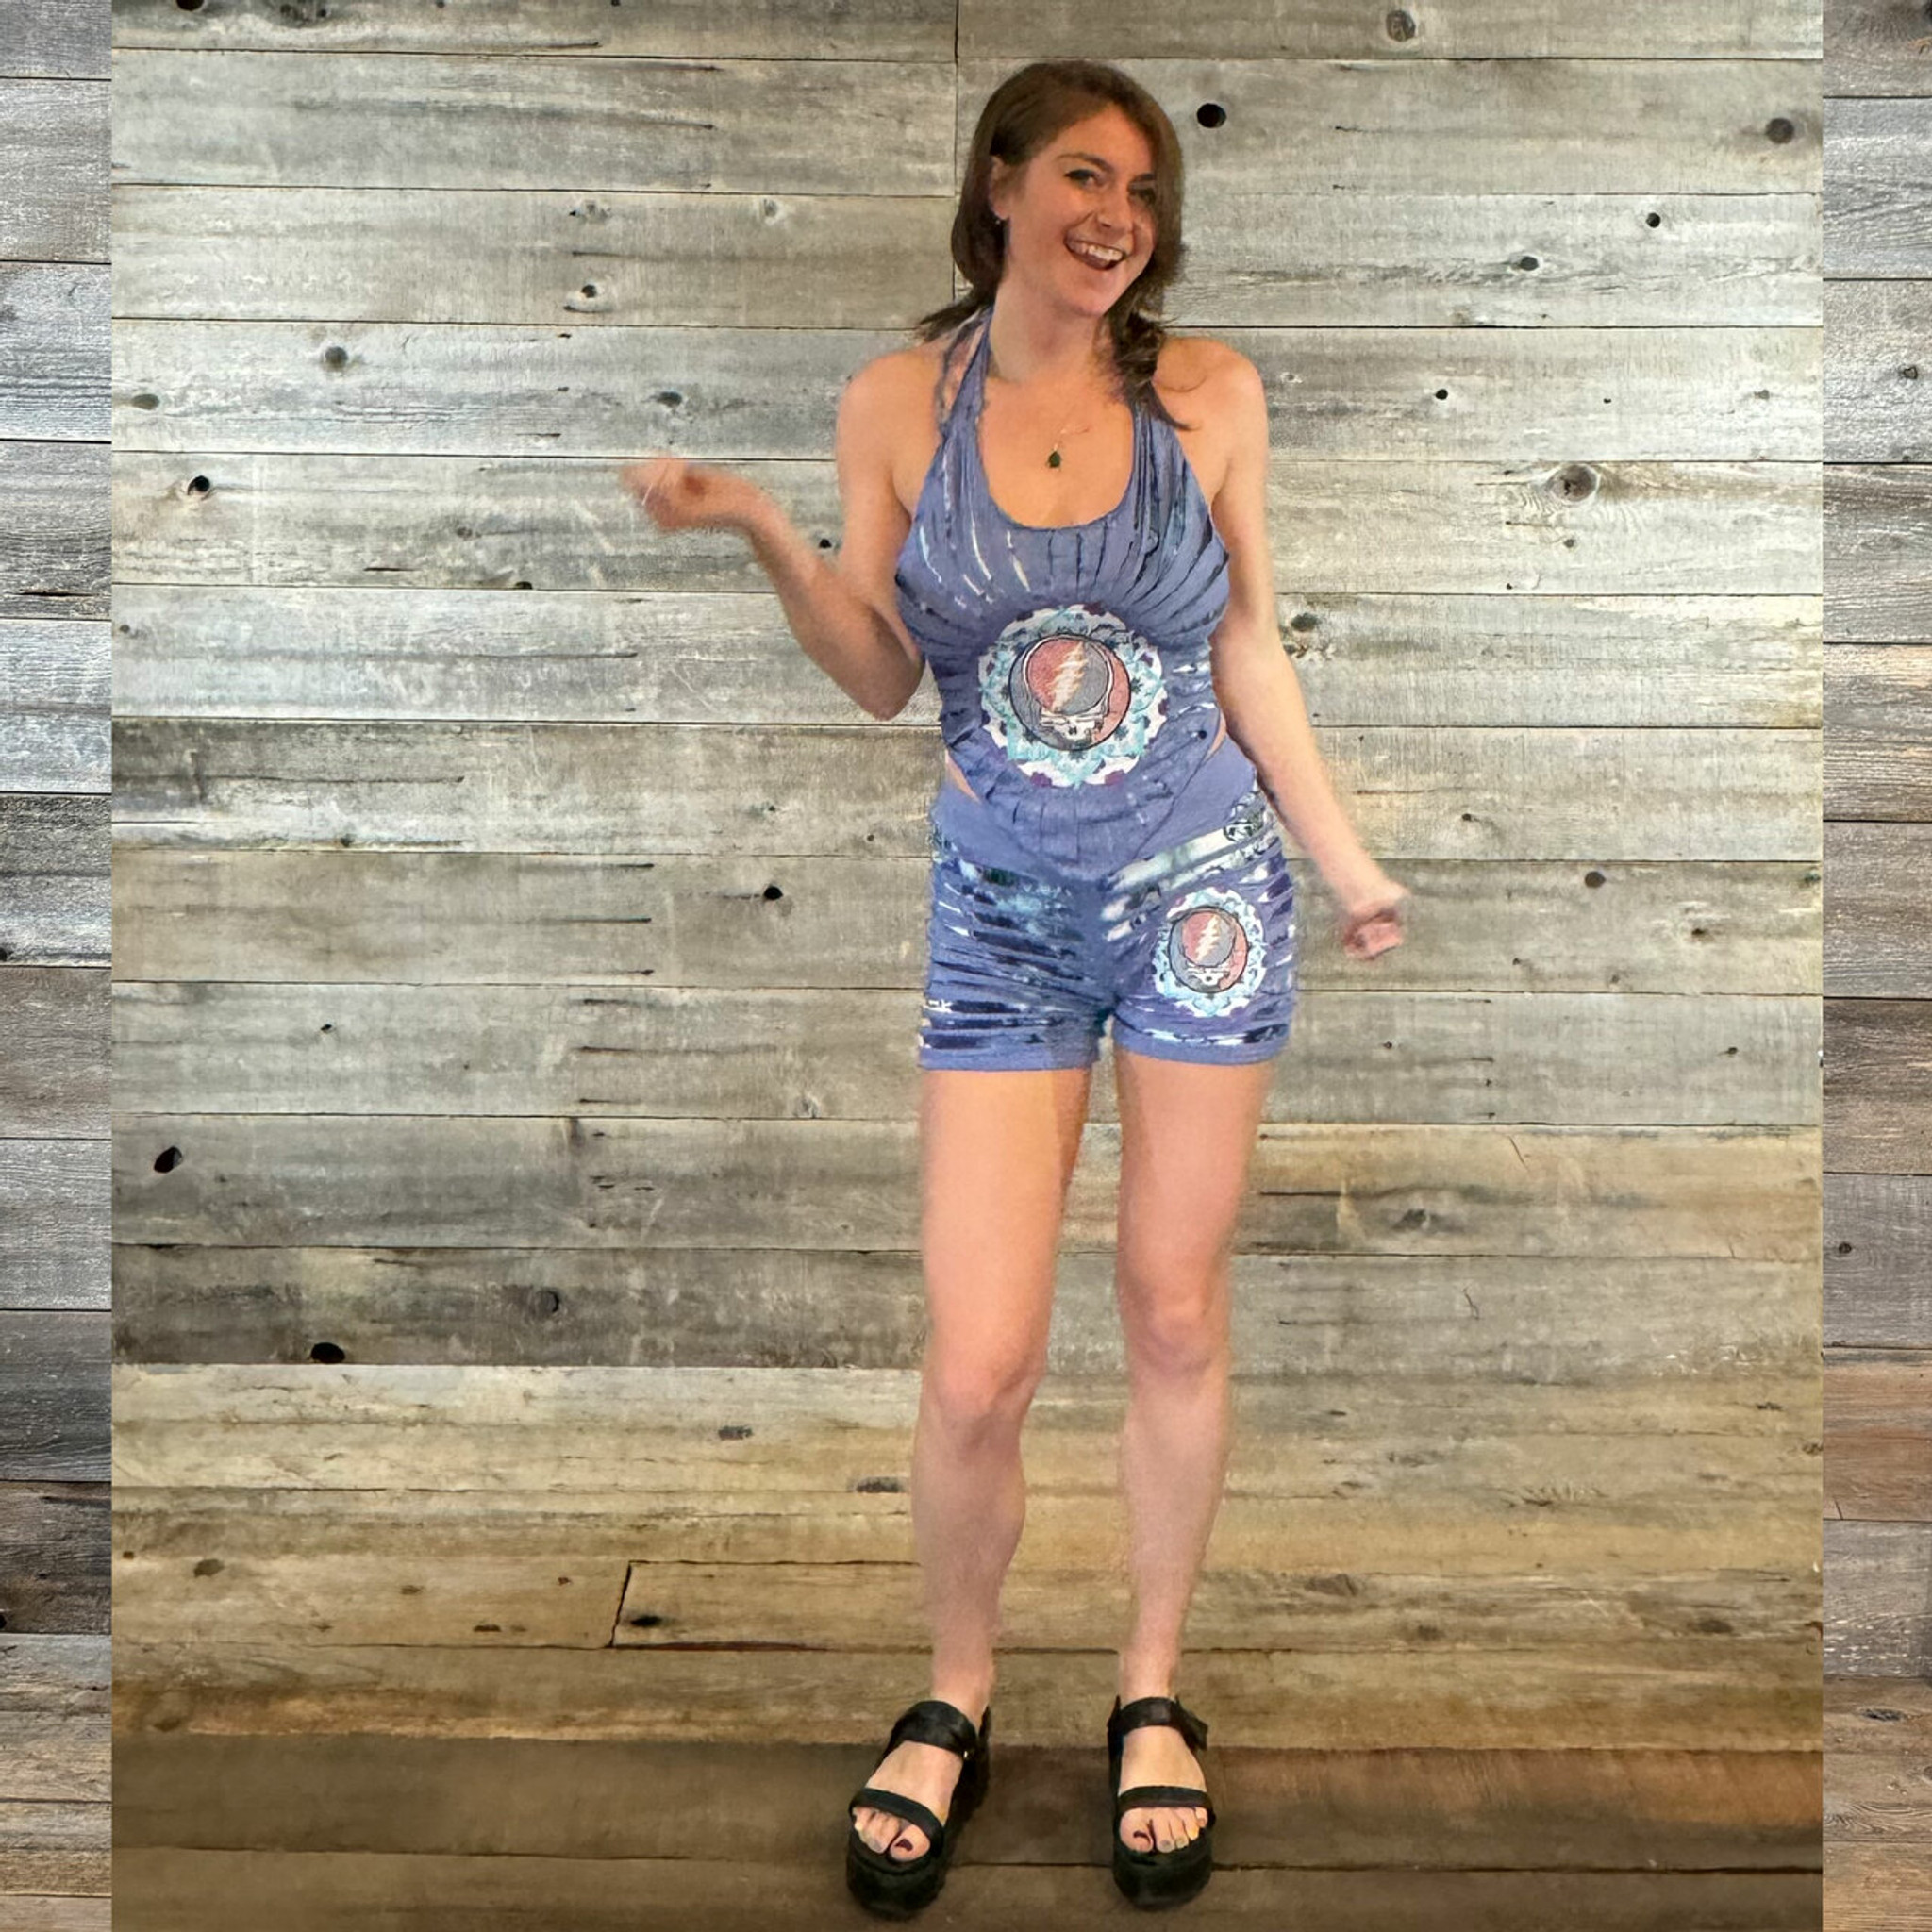 LOOSE LUCY COVER UP Grateful Dead Cotton Lycra Razor Cut Tie Dye w/ Embroidered Steal Your Face Mandala Chest Cover Up